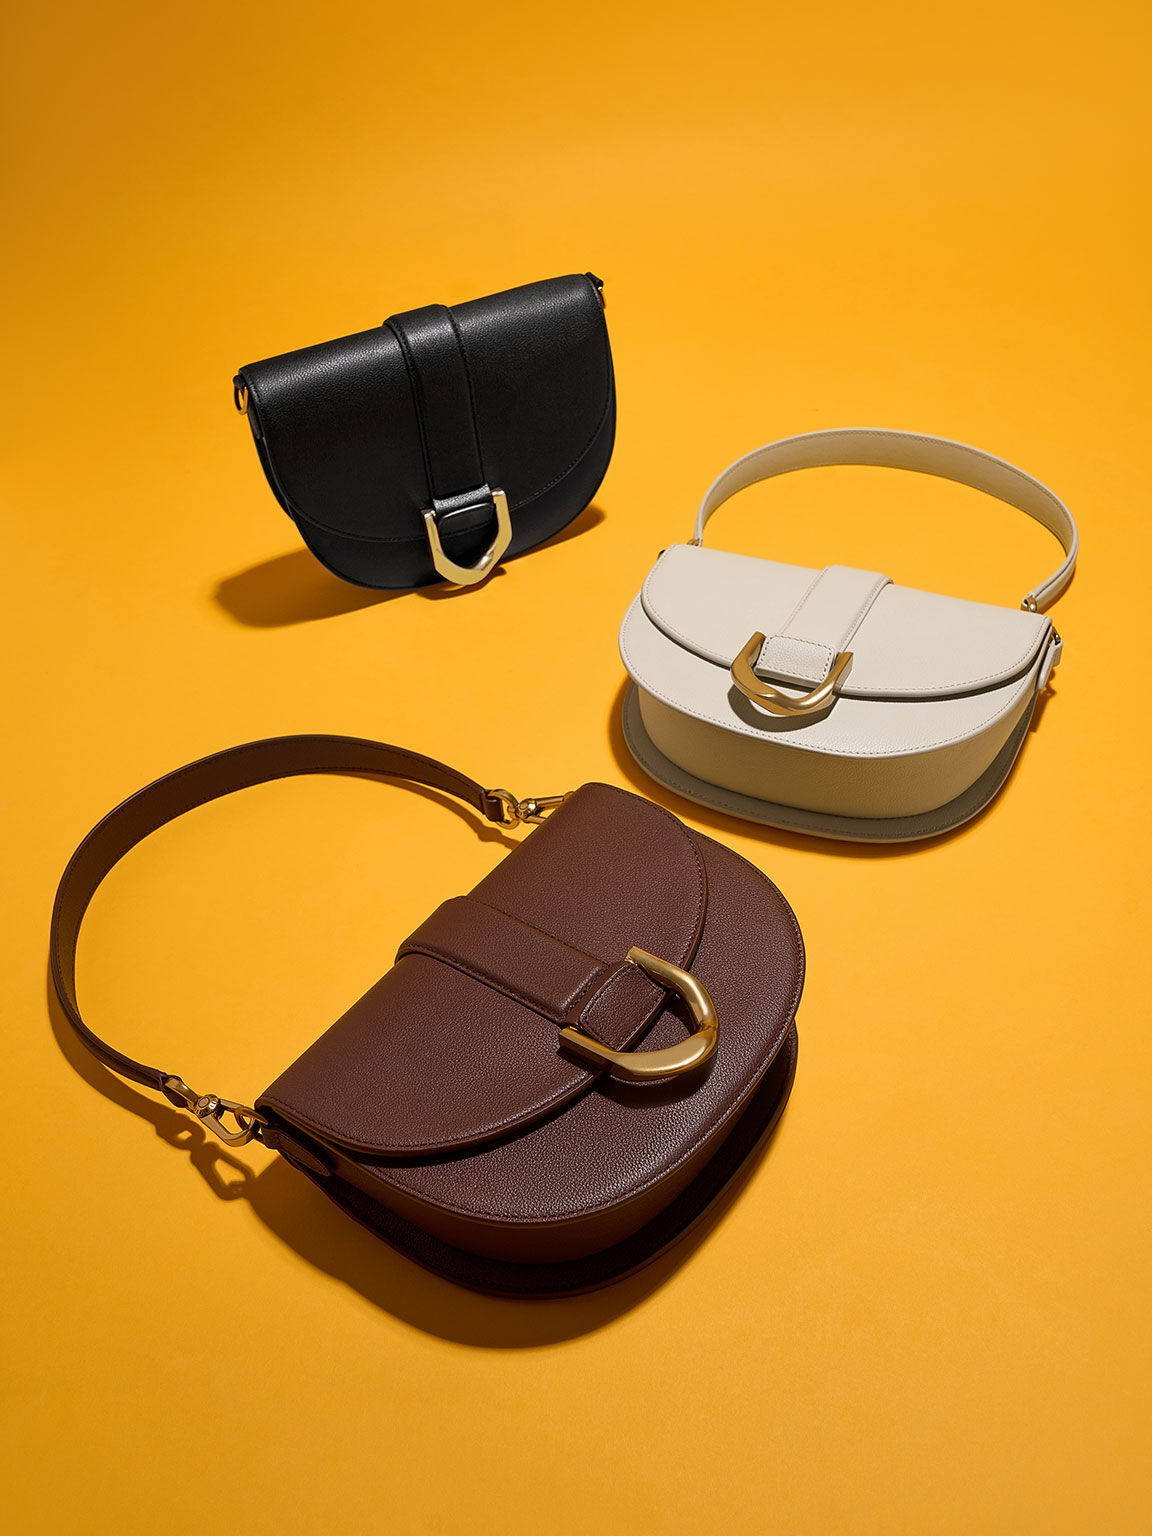 Charles_Keith on X: The Gabine leather saddle bag and buckled